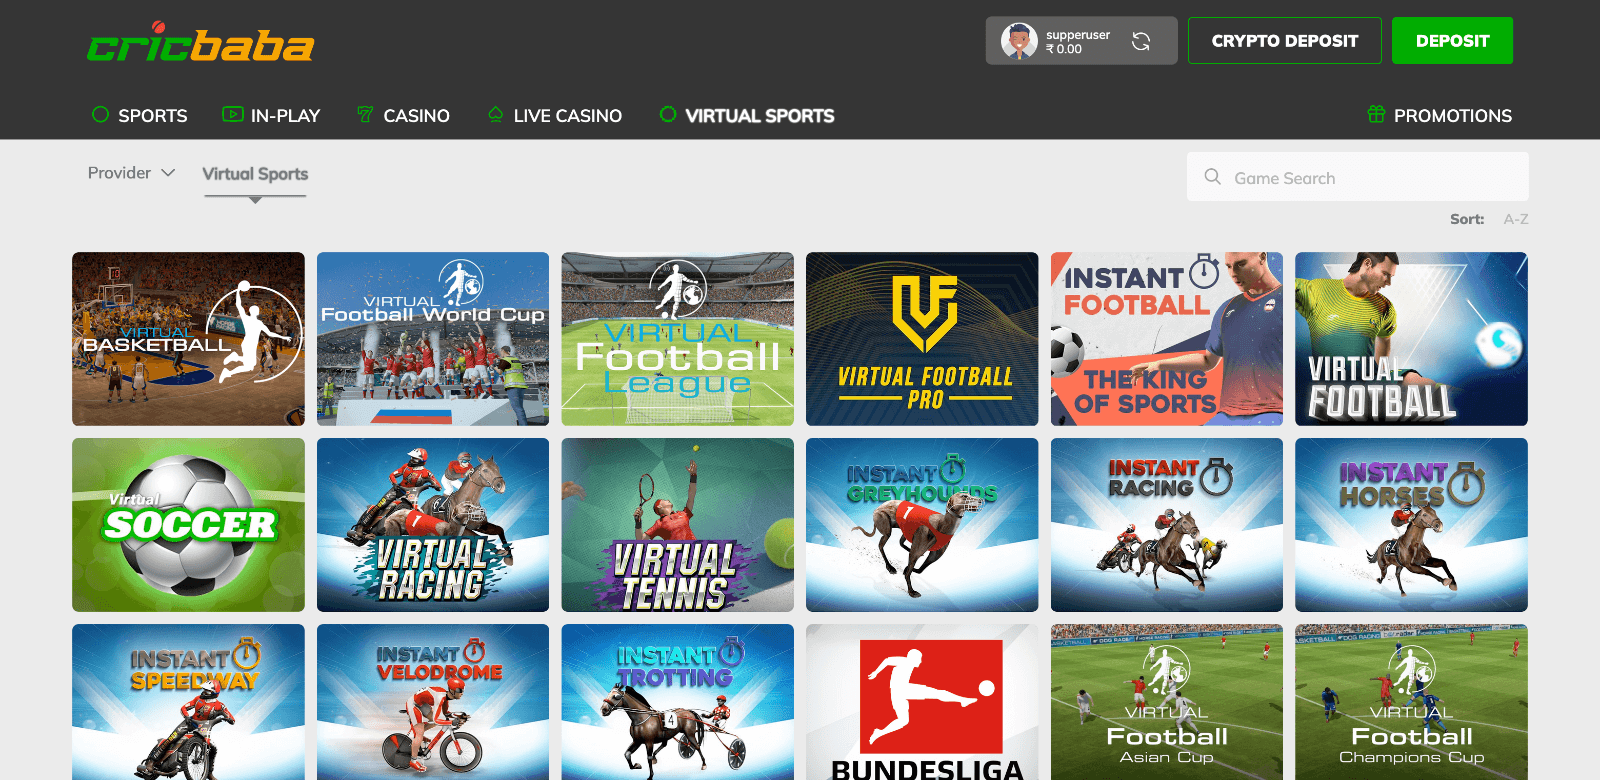 Virtual sports betting section at Cricbaba website